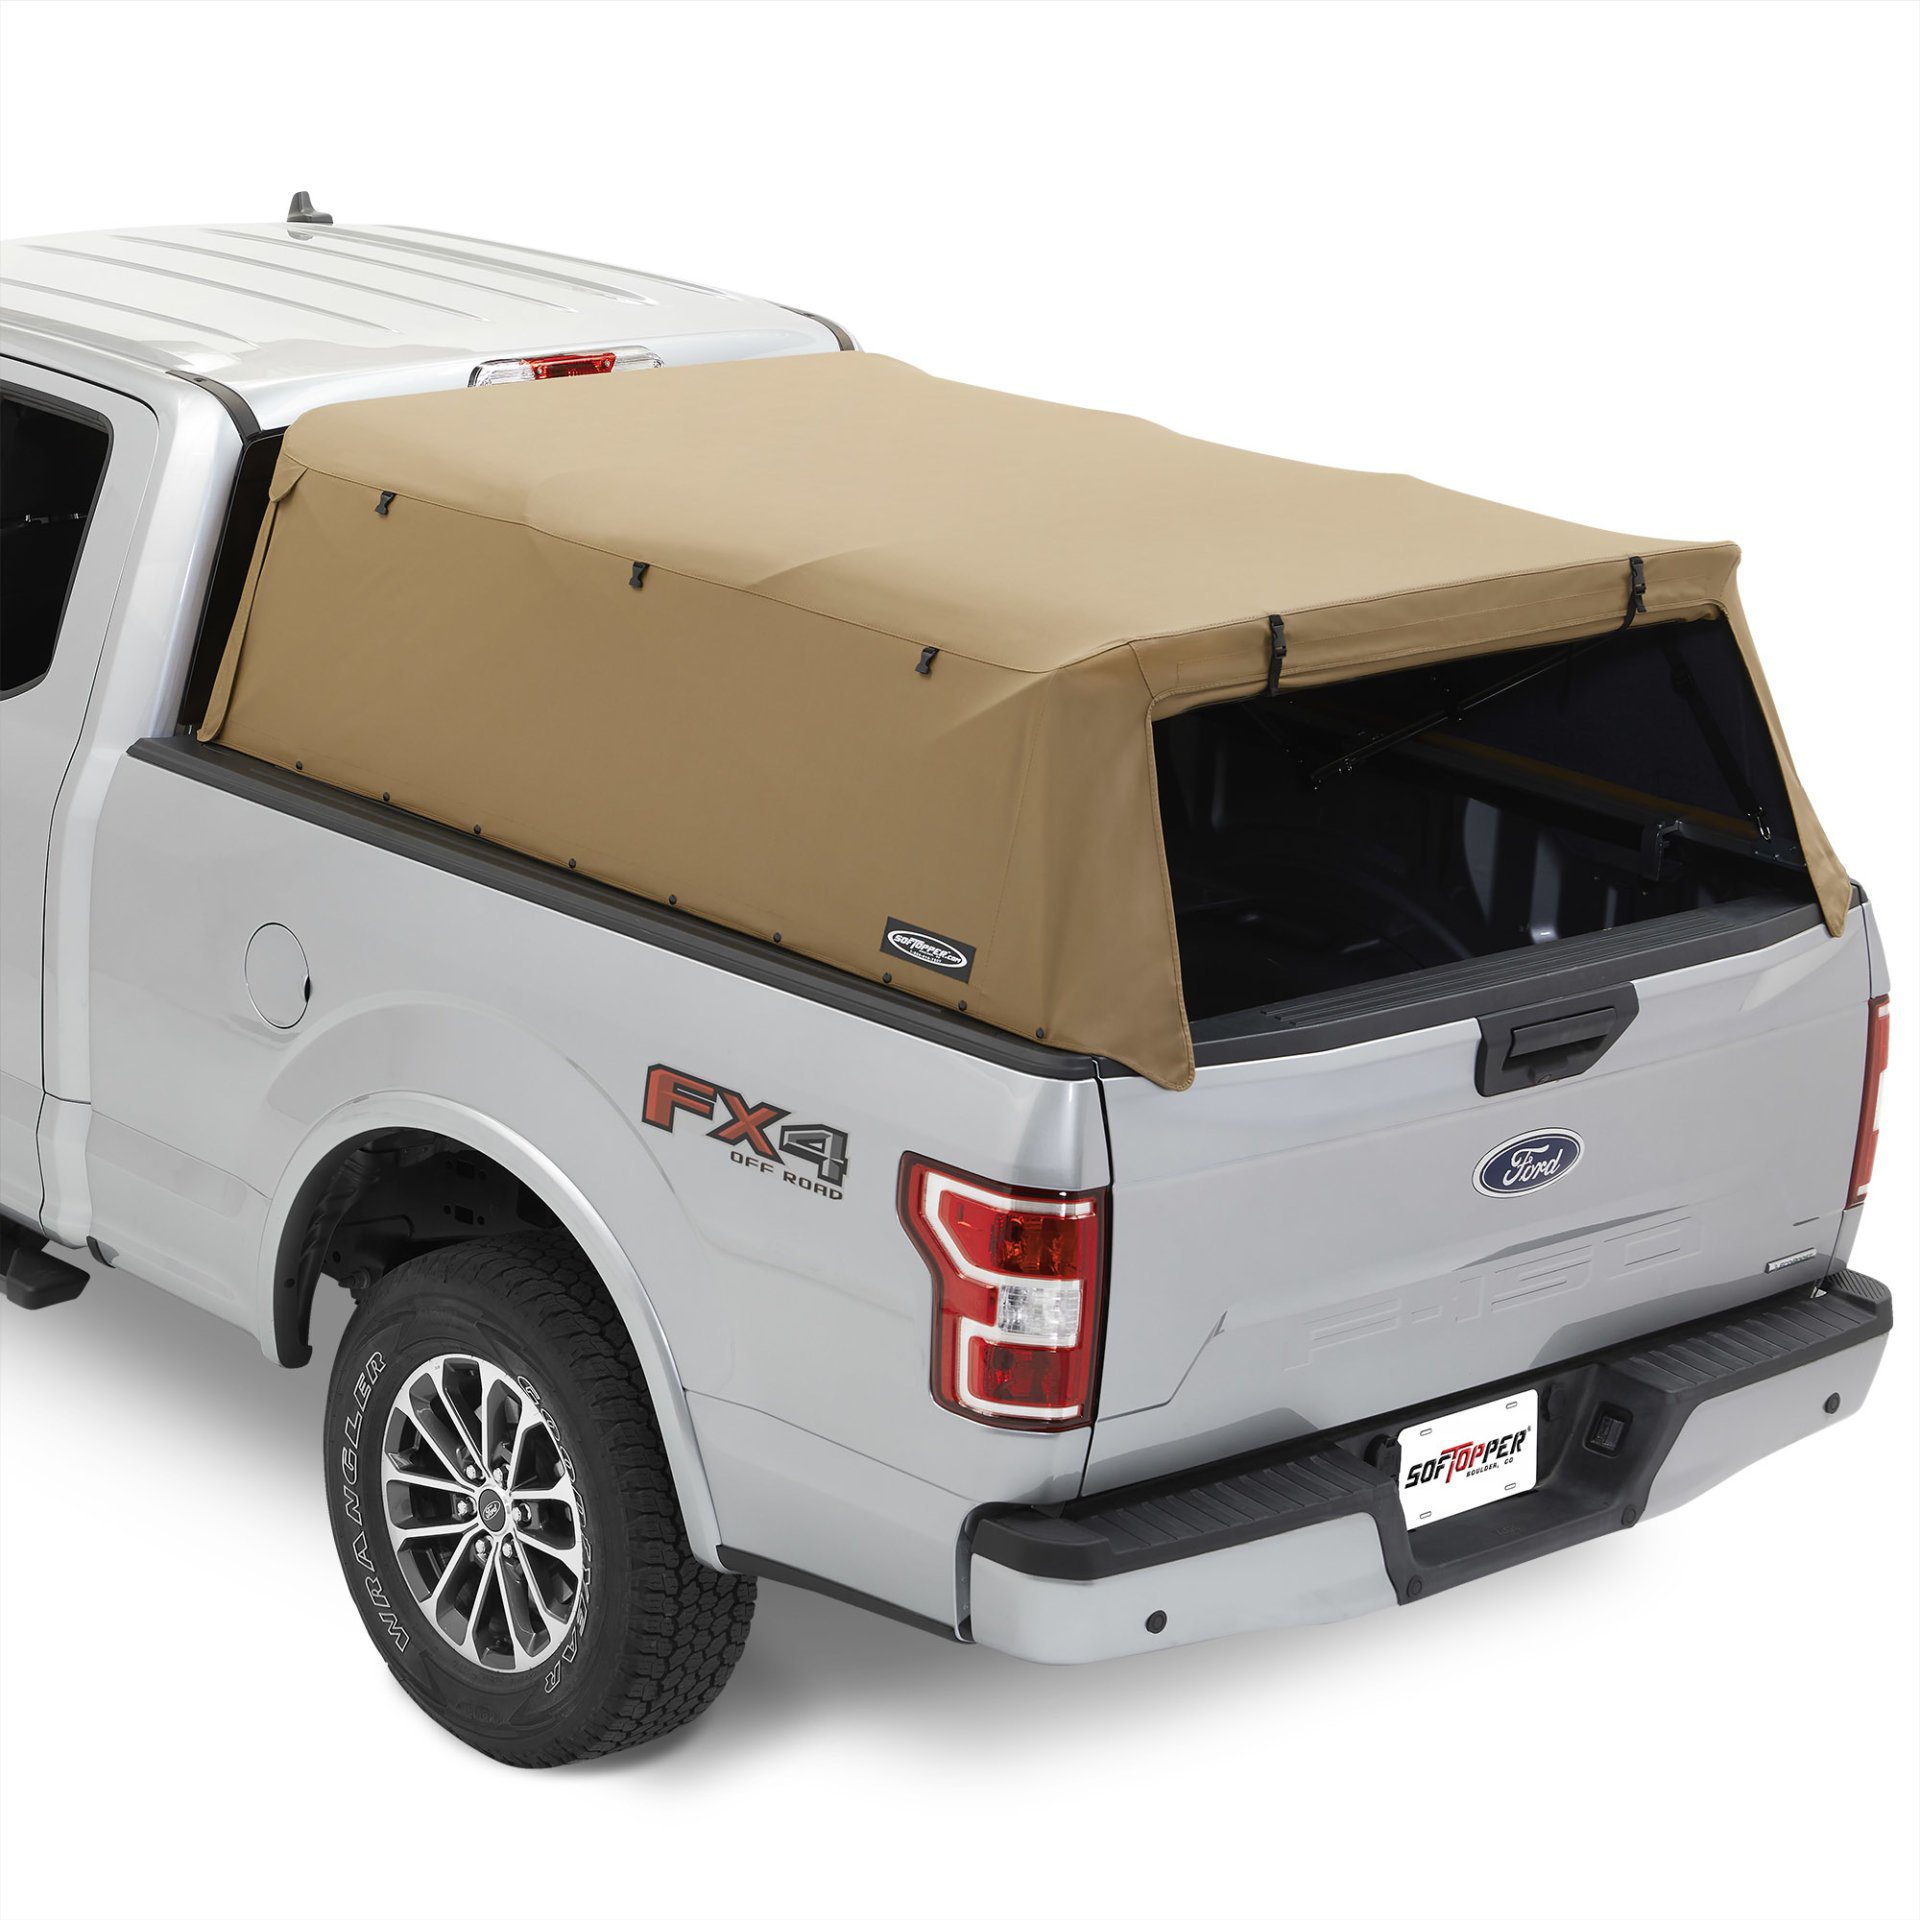 Softopper® Truck Bed Cap So Fr70o Softopper Truck Tops Suv Tops